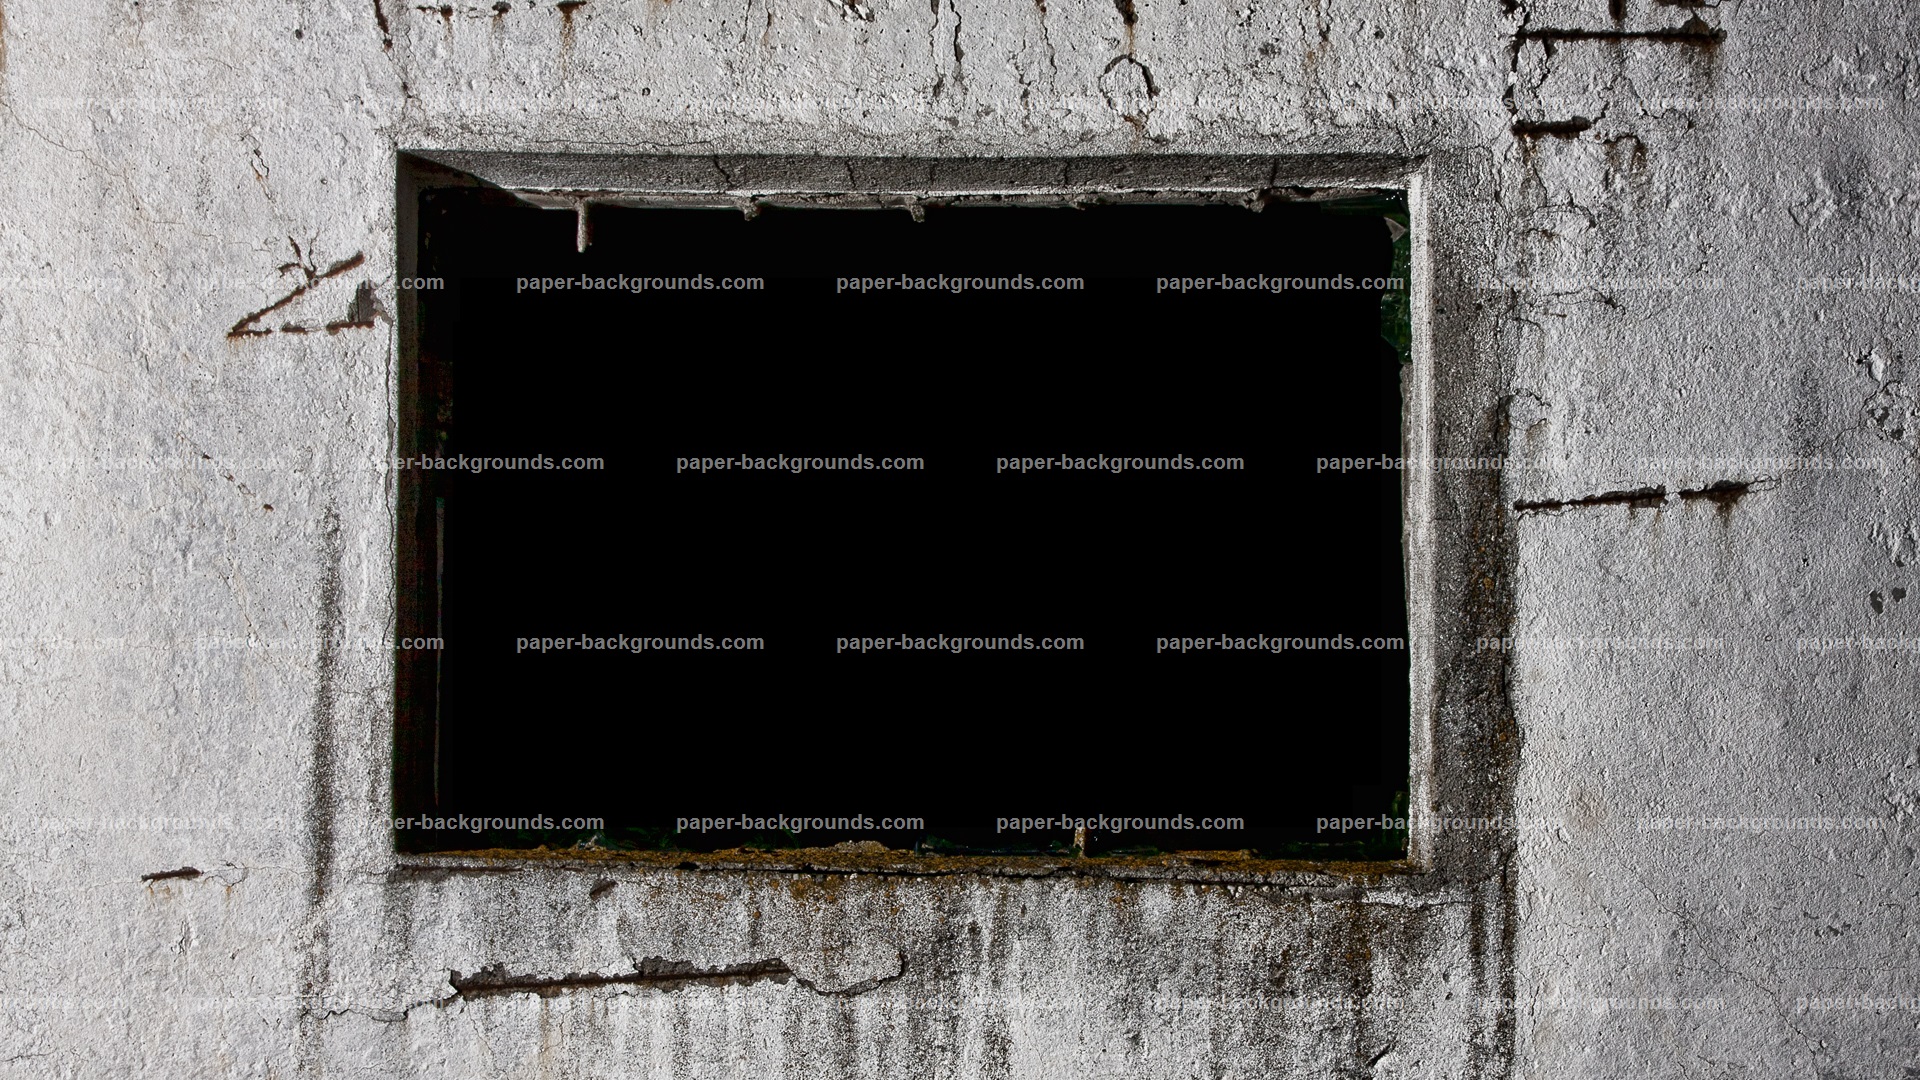 Grunge Concrete Wall Window Frame HD Paper Background